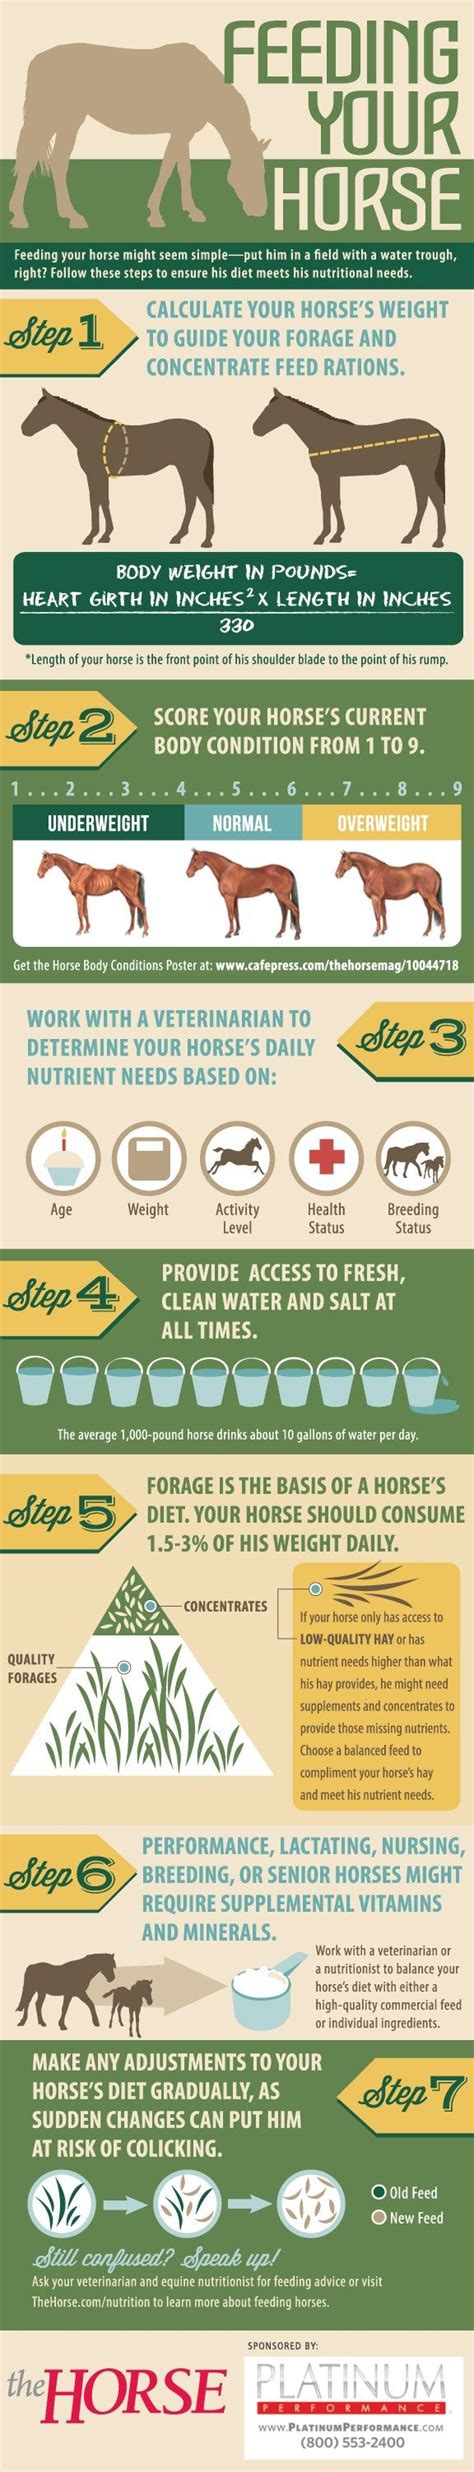 Infographic Feeding Your Horse Equine Nutrition Horse Nutrition